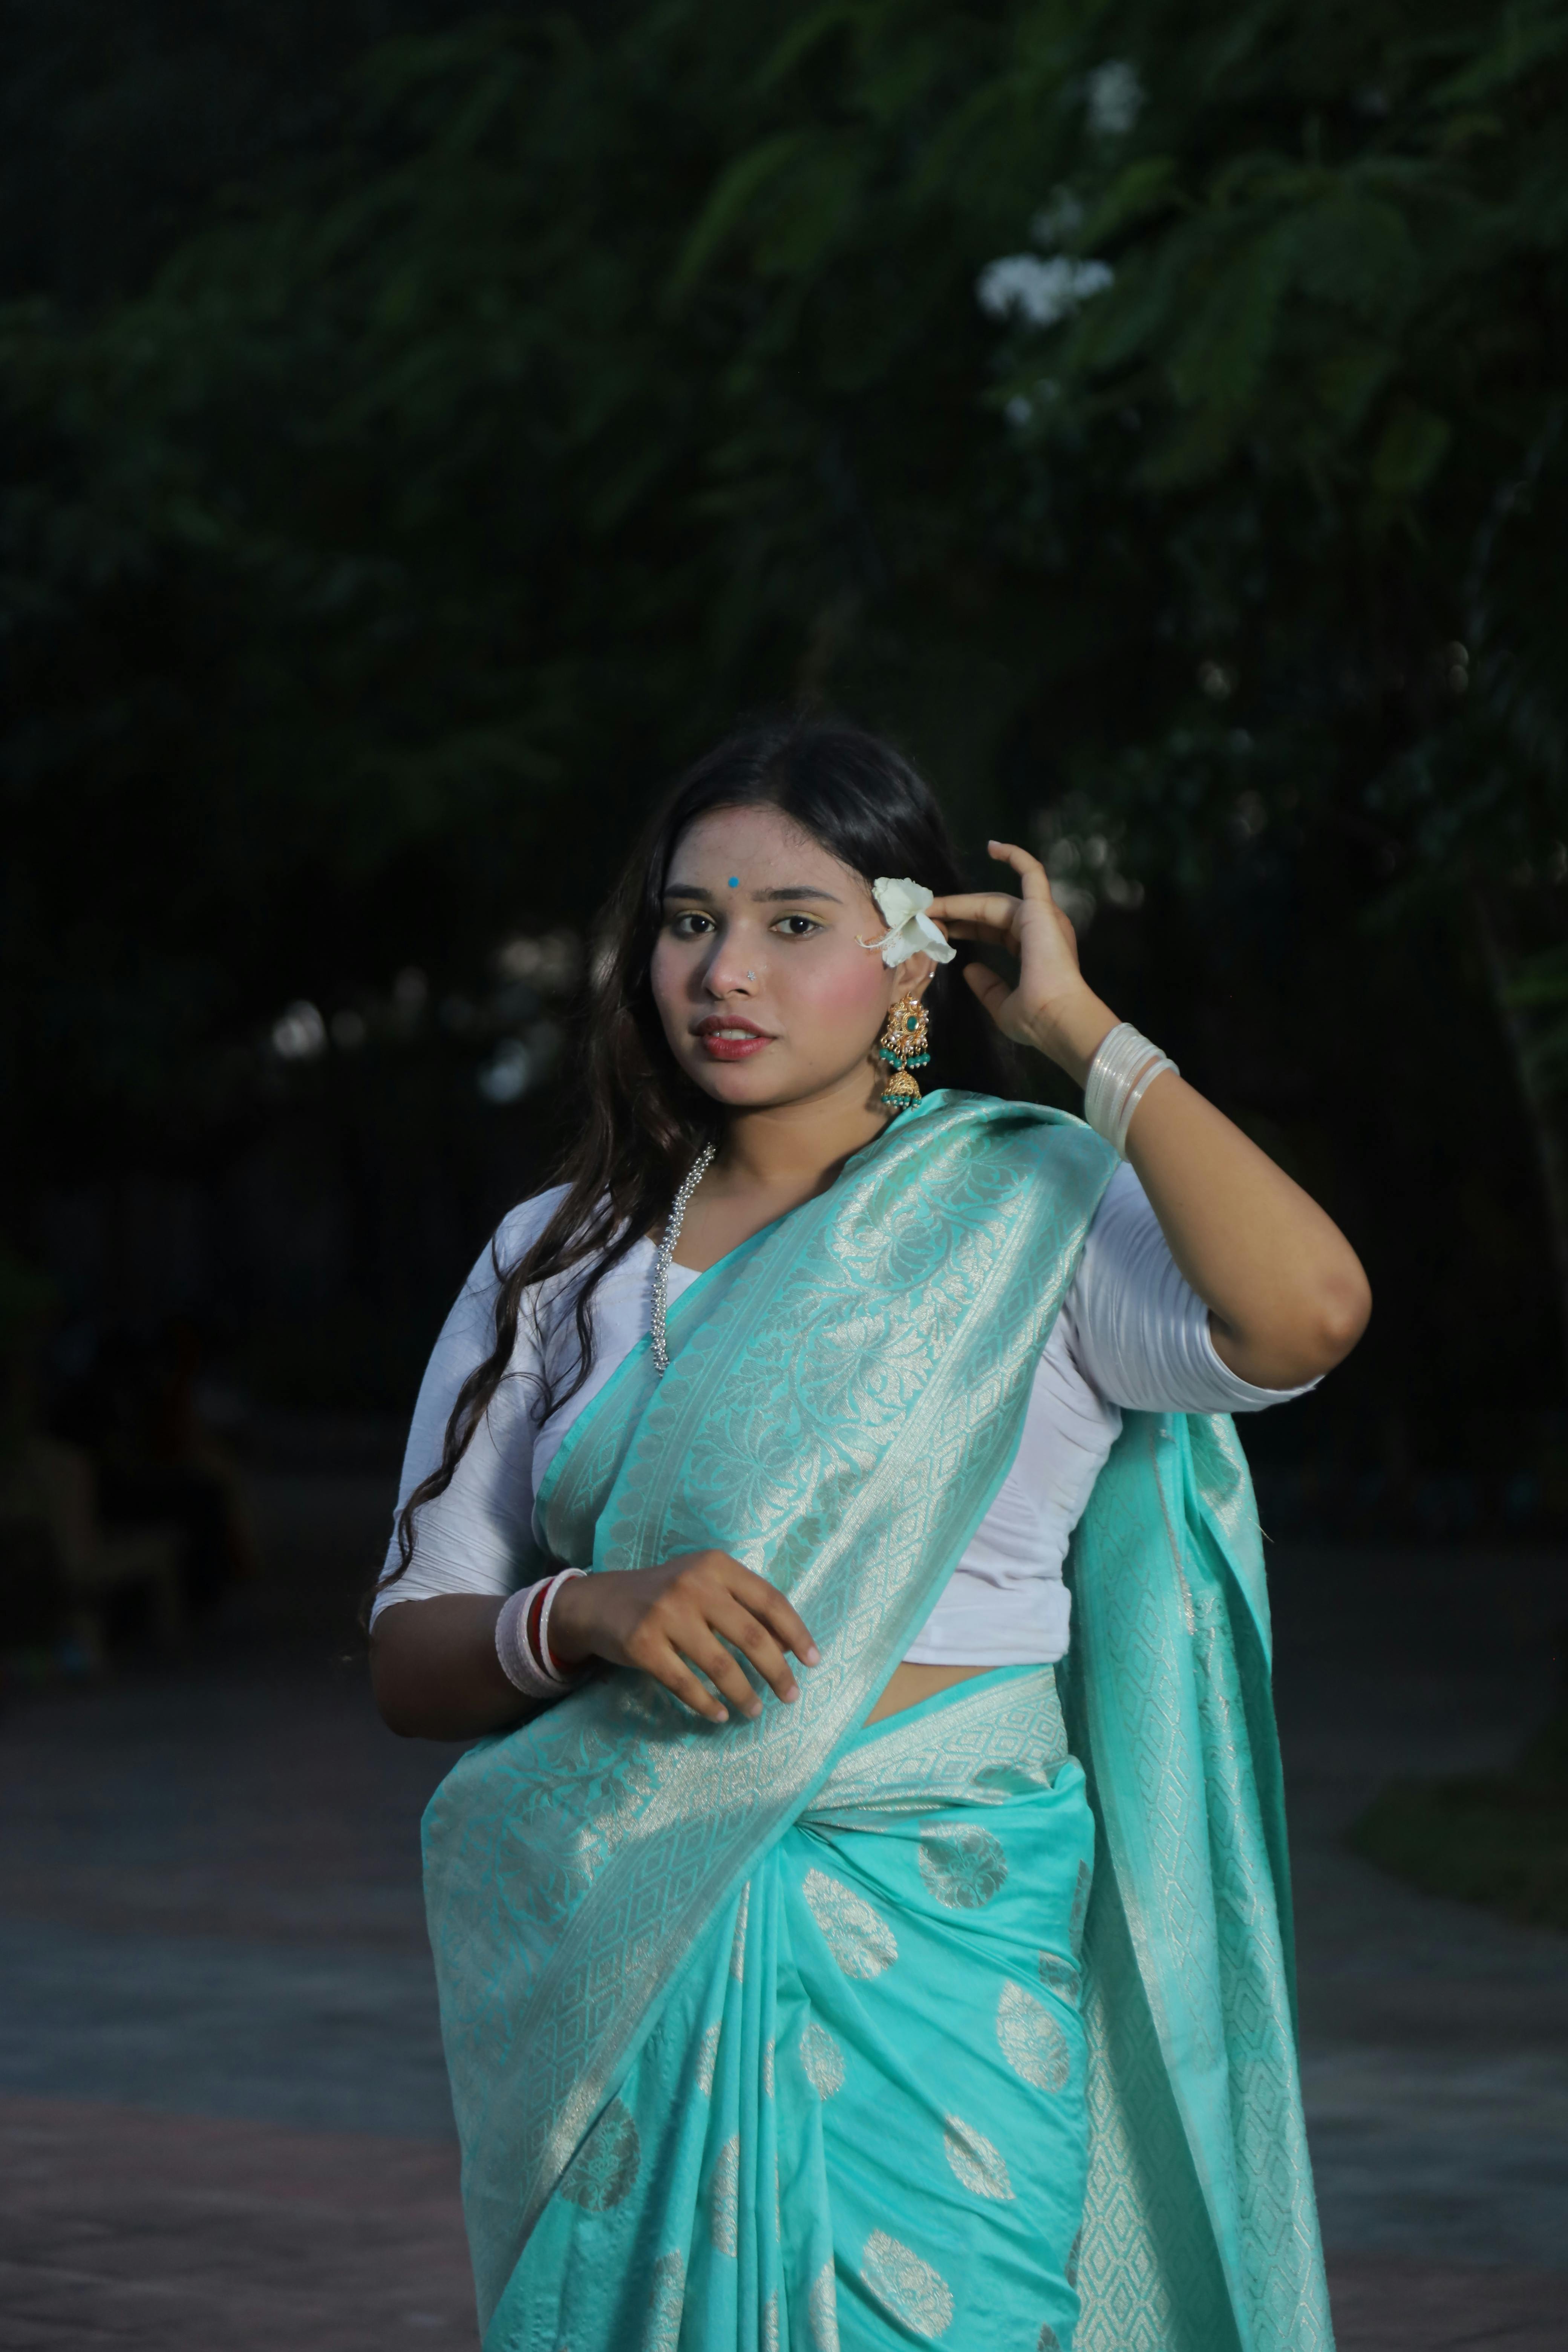 Image of Indian traditional Beautiful Woman Wearing an traditional Saree  And Posing On The Outdoor With a Smile Face-AC593056-Picxy